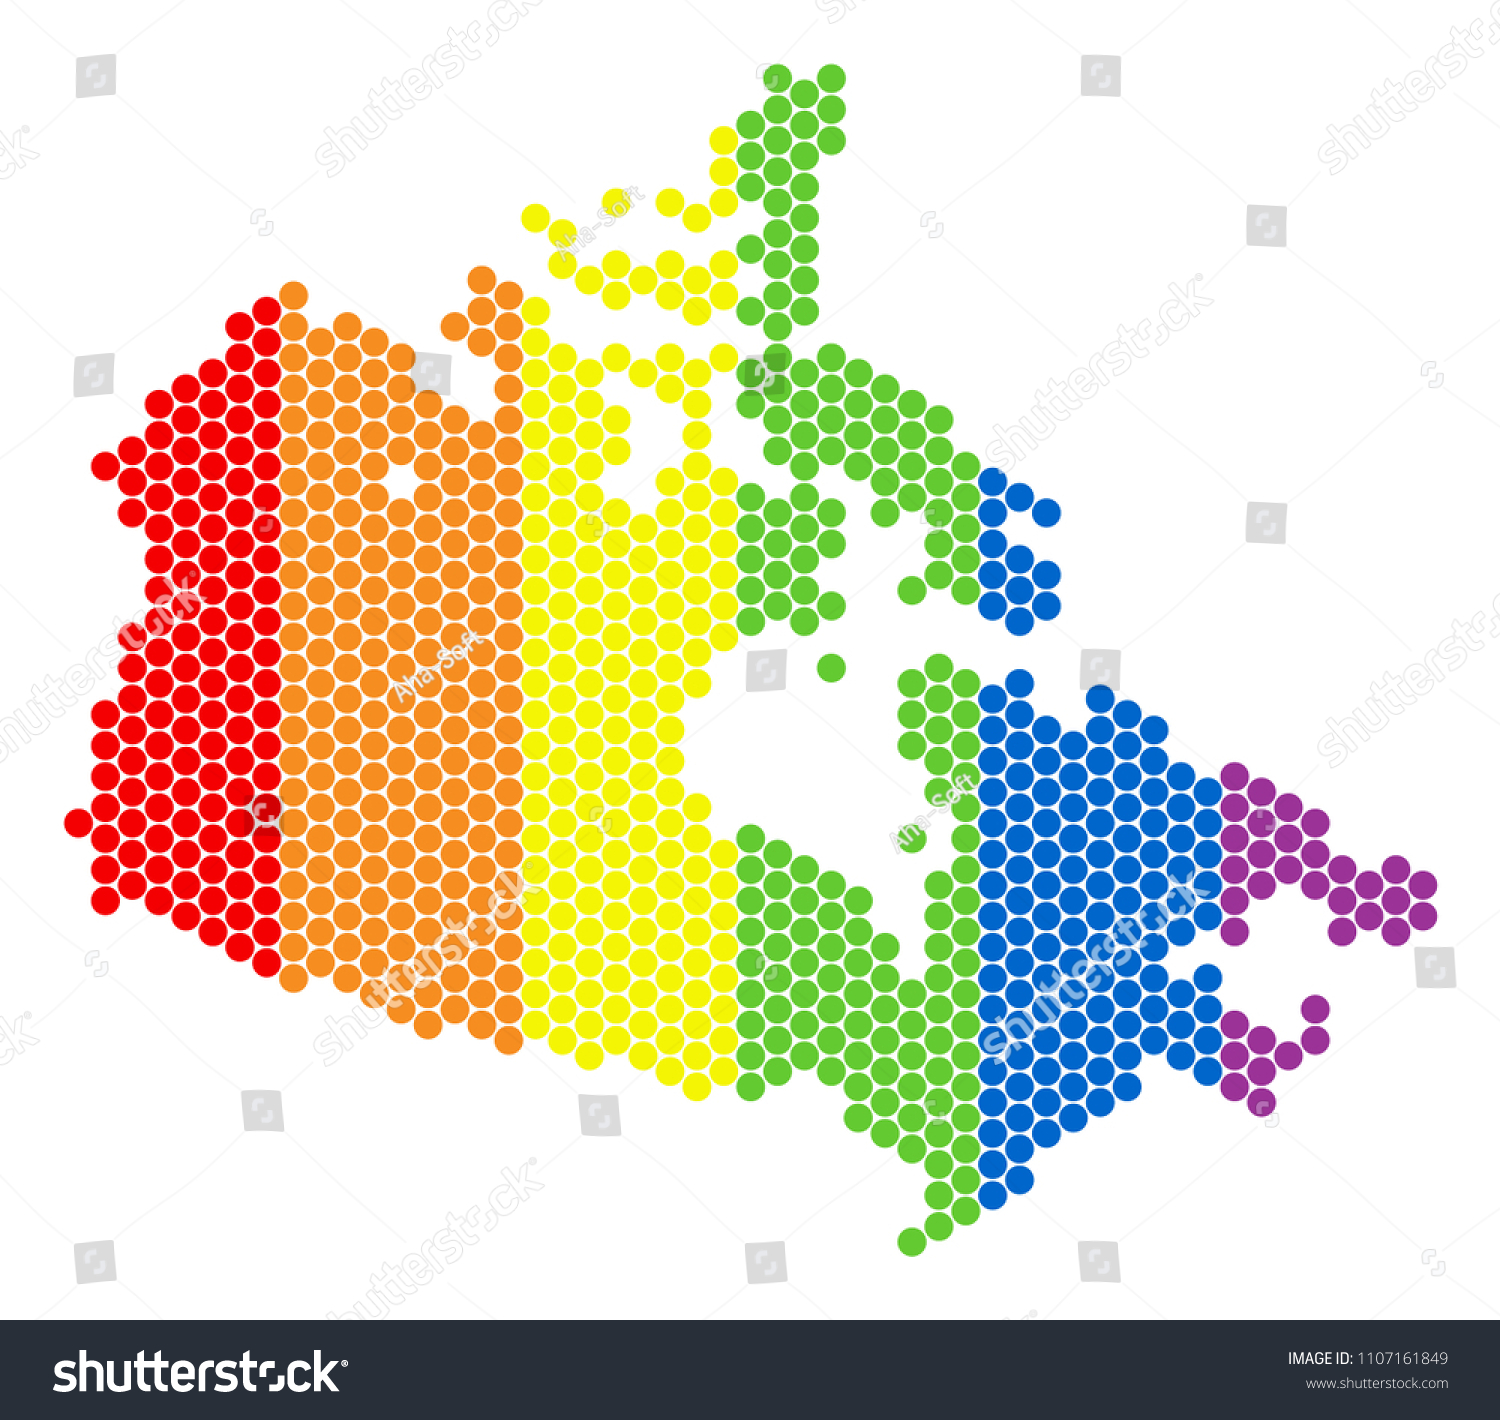 A Dotted Lgbt Canada Map For Lesbians Gays Royalty Free Stock Vector 1107161849 9016